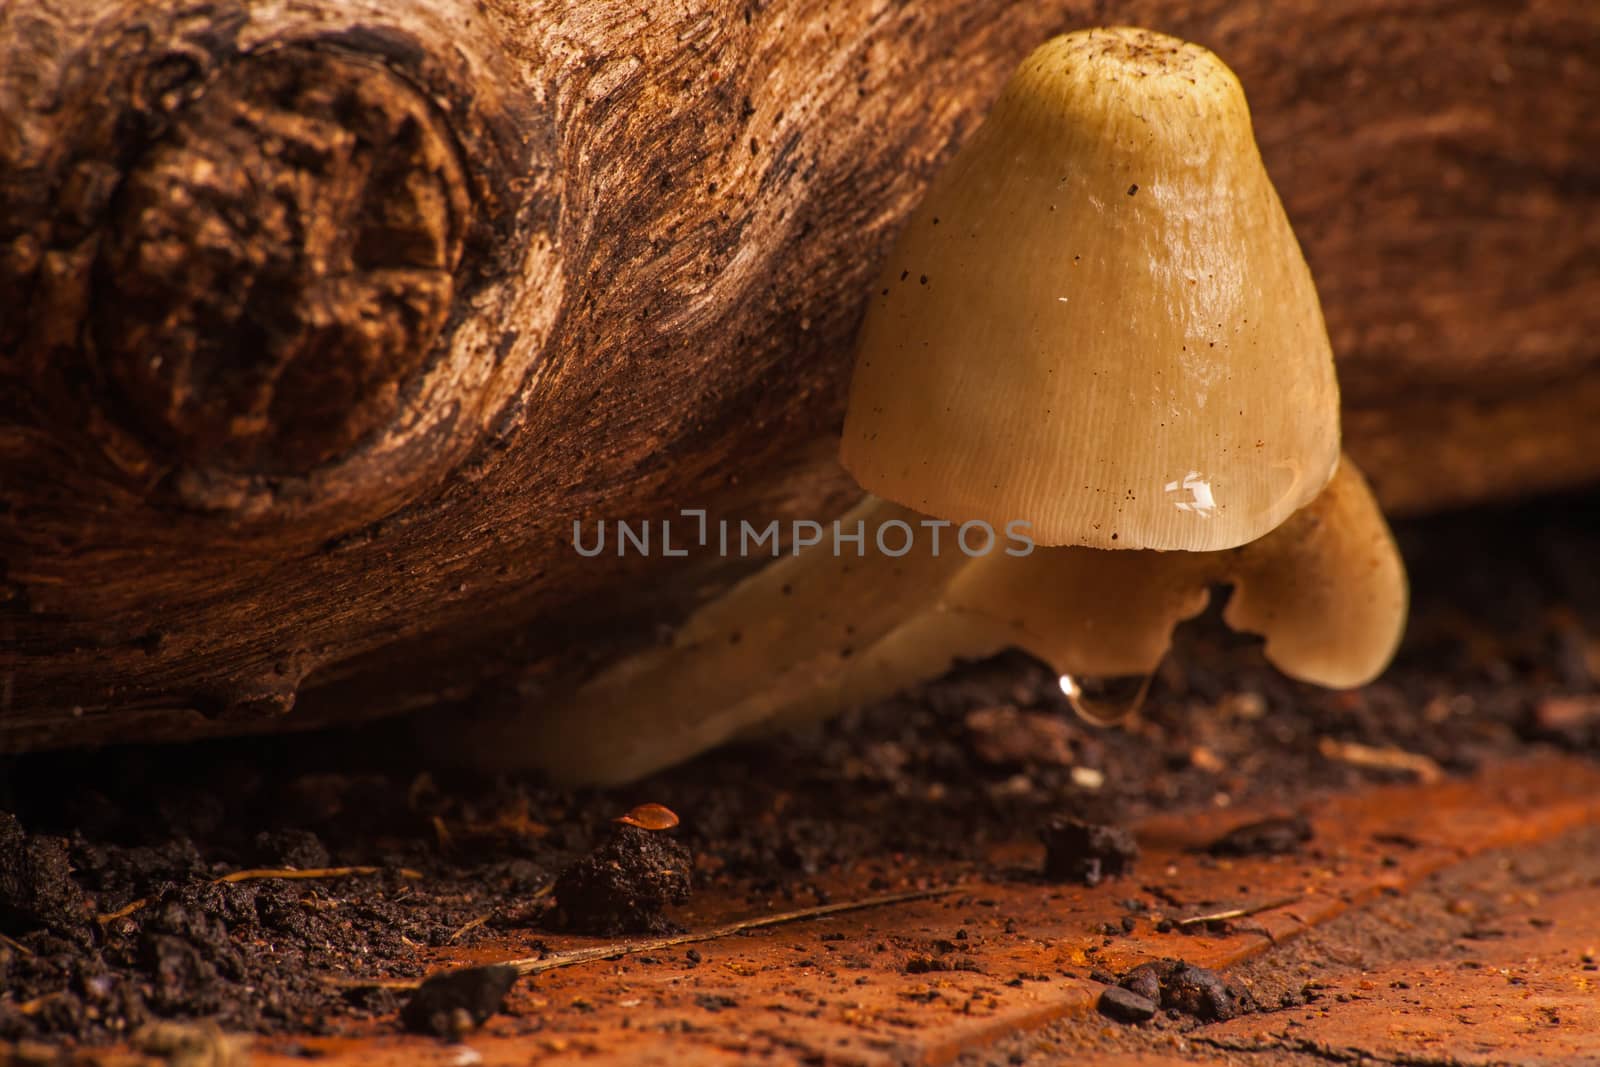 Wild mushrooms growing from under a log.